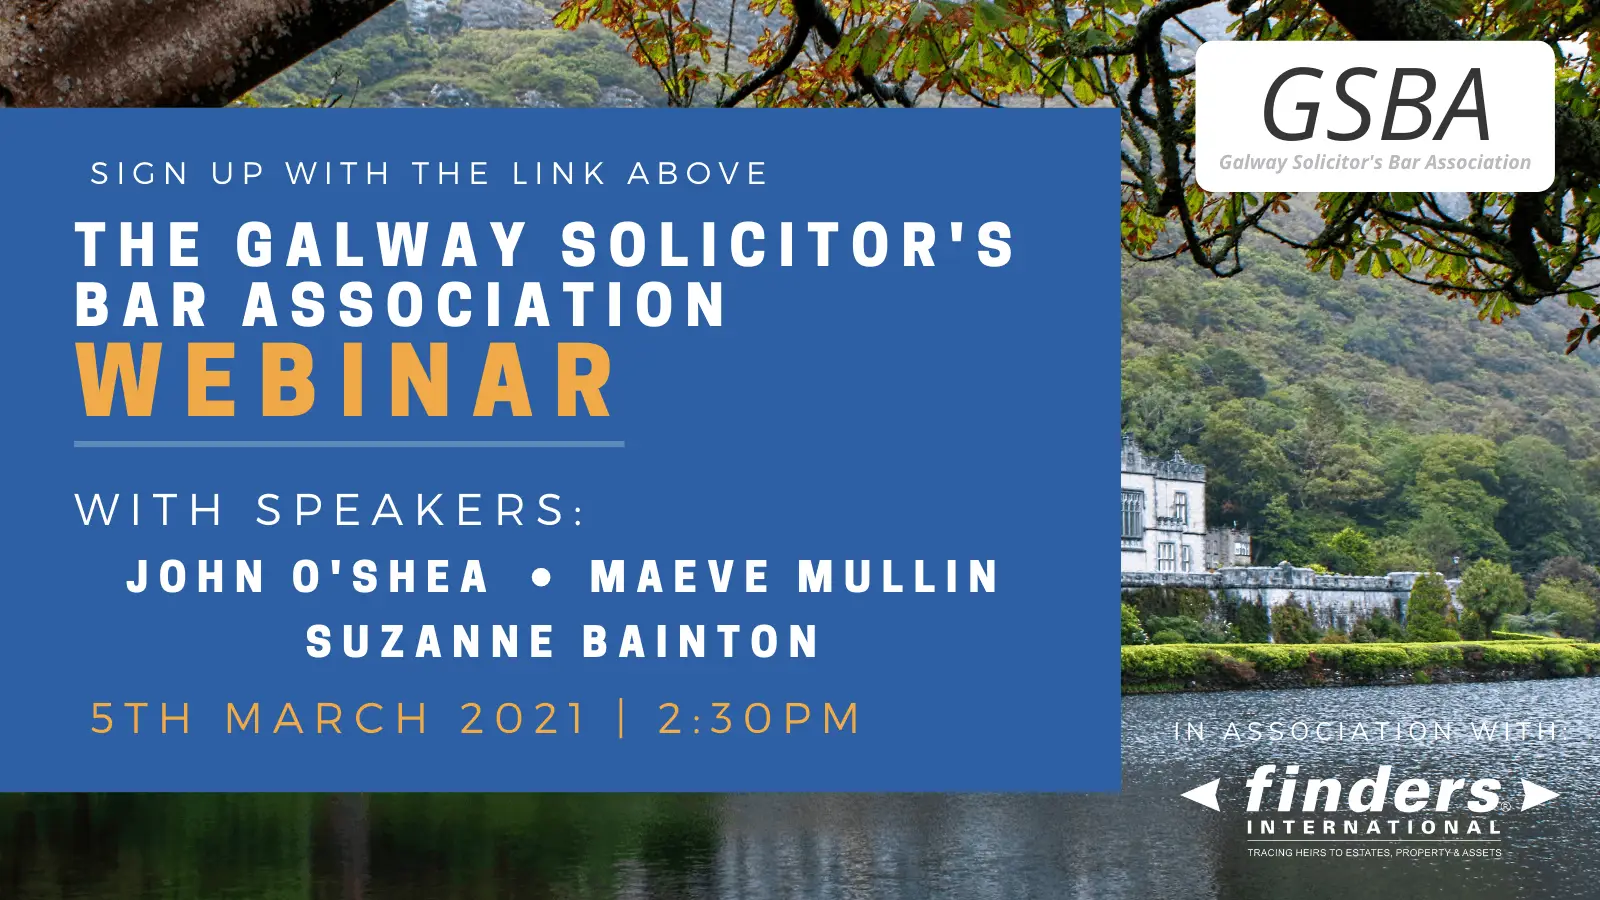 Galway Solicitor's Bar Association